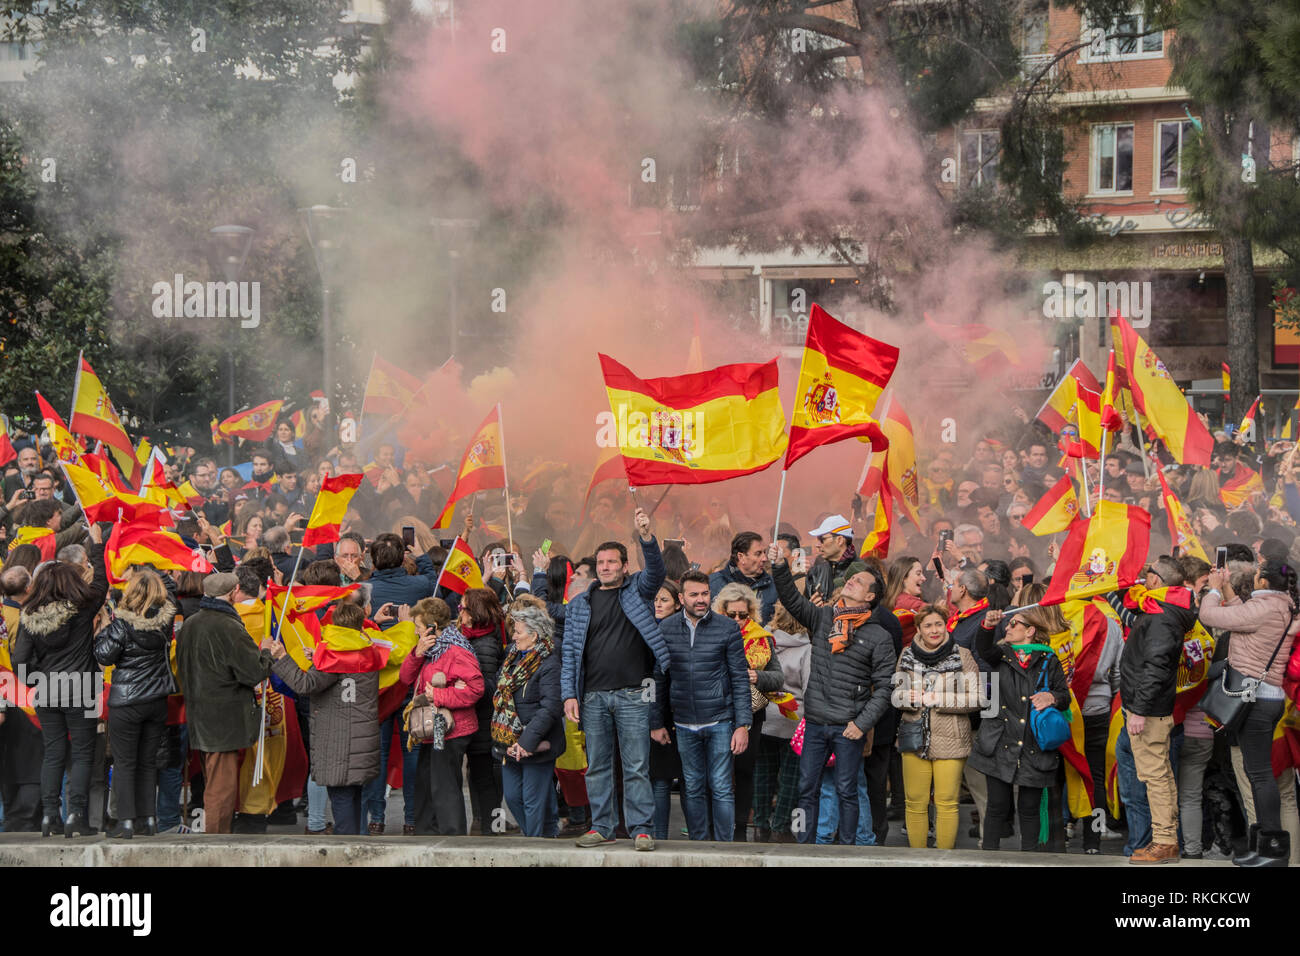 Protesters are seen waving Spanish flags during the protest. Thousands of Spanish citizens protested at Colon Square in Madrid against the government of Pedro Sánchez, asking for an election. Stock Photo